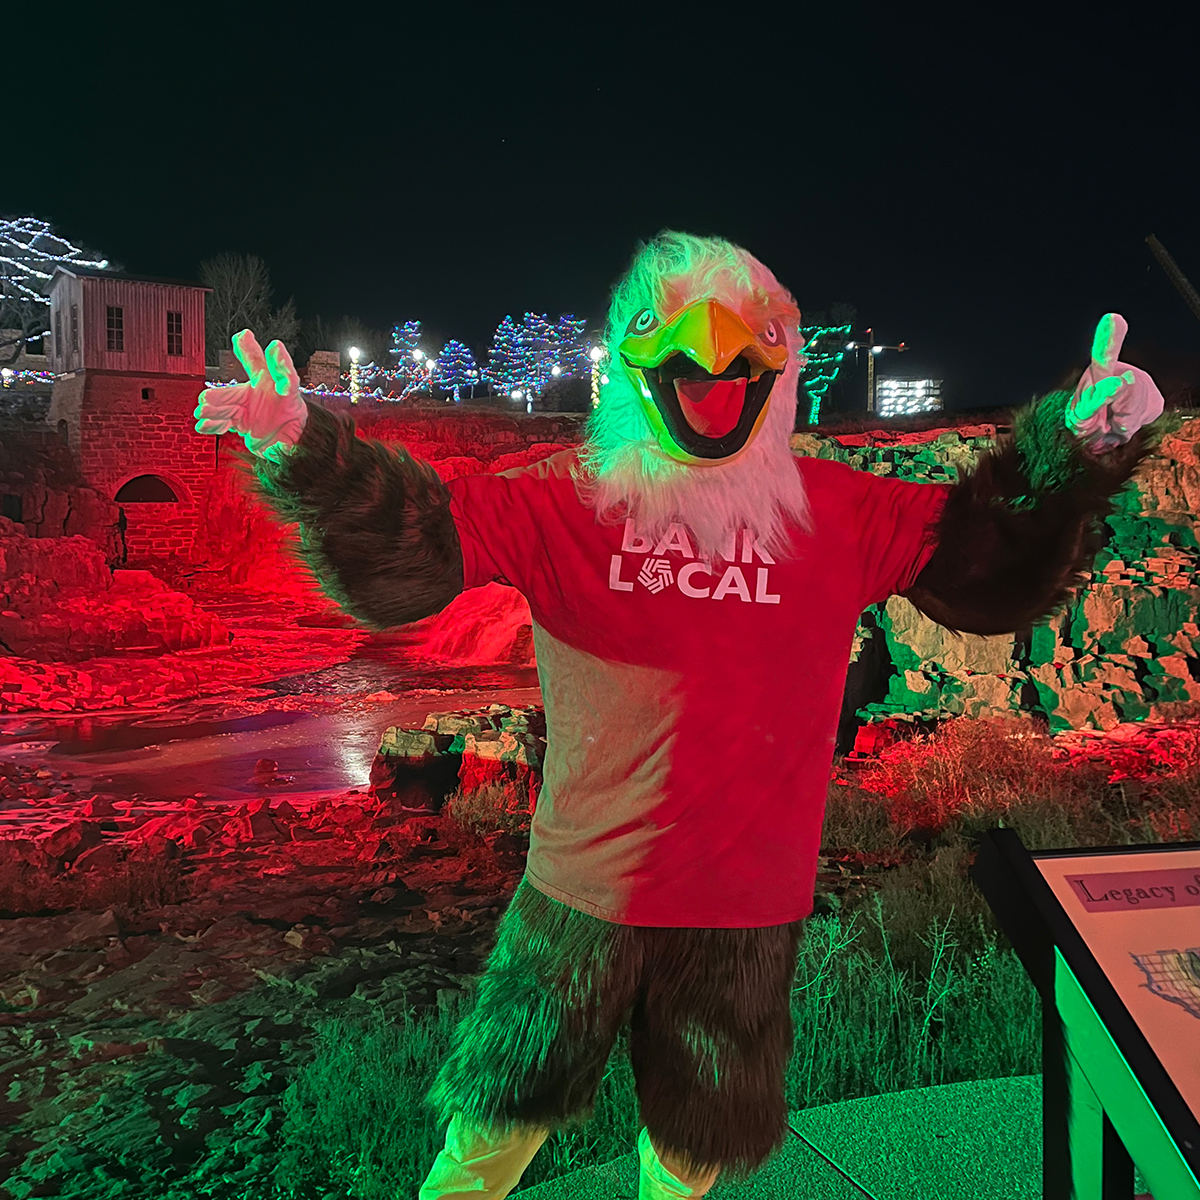 Eagle mascot wearing First National Bank shirt poses in front of waterfall at Falls Park, lit up by Christmas lights.